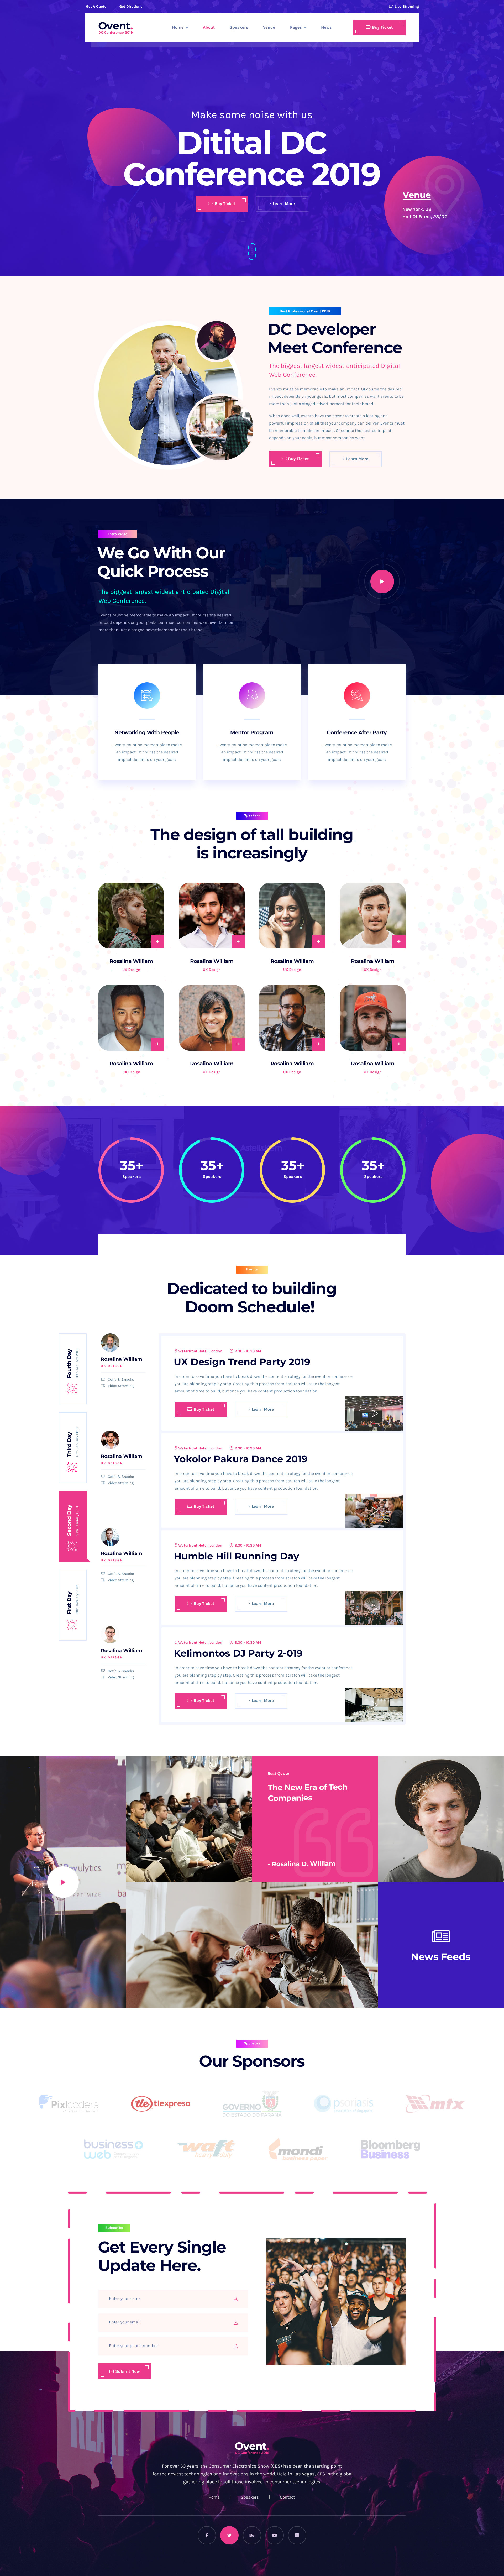 OVent - Event & Conference PSD Template by Webtend | ThemeForest